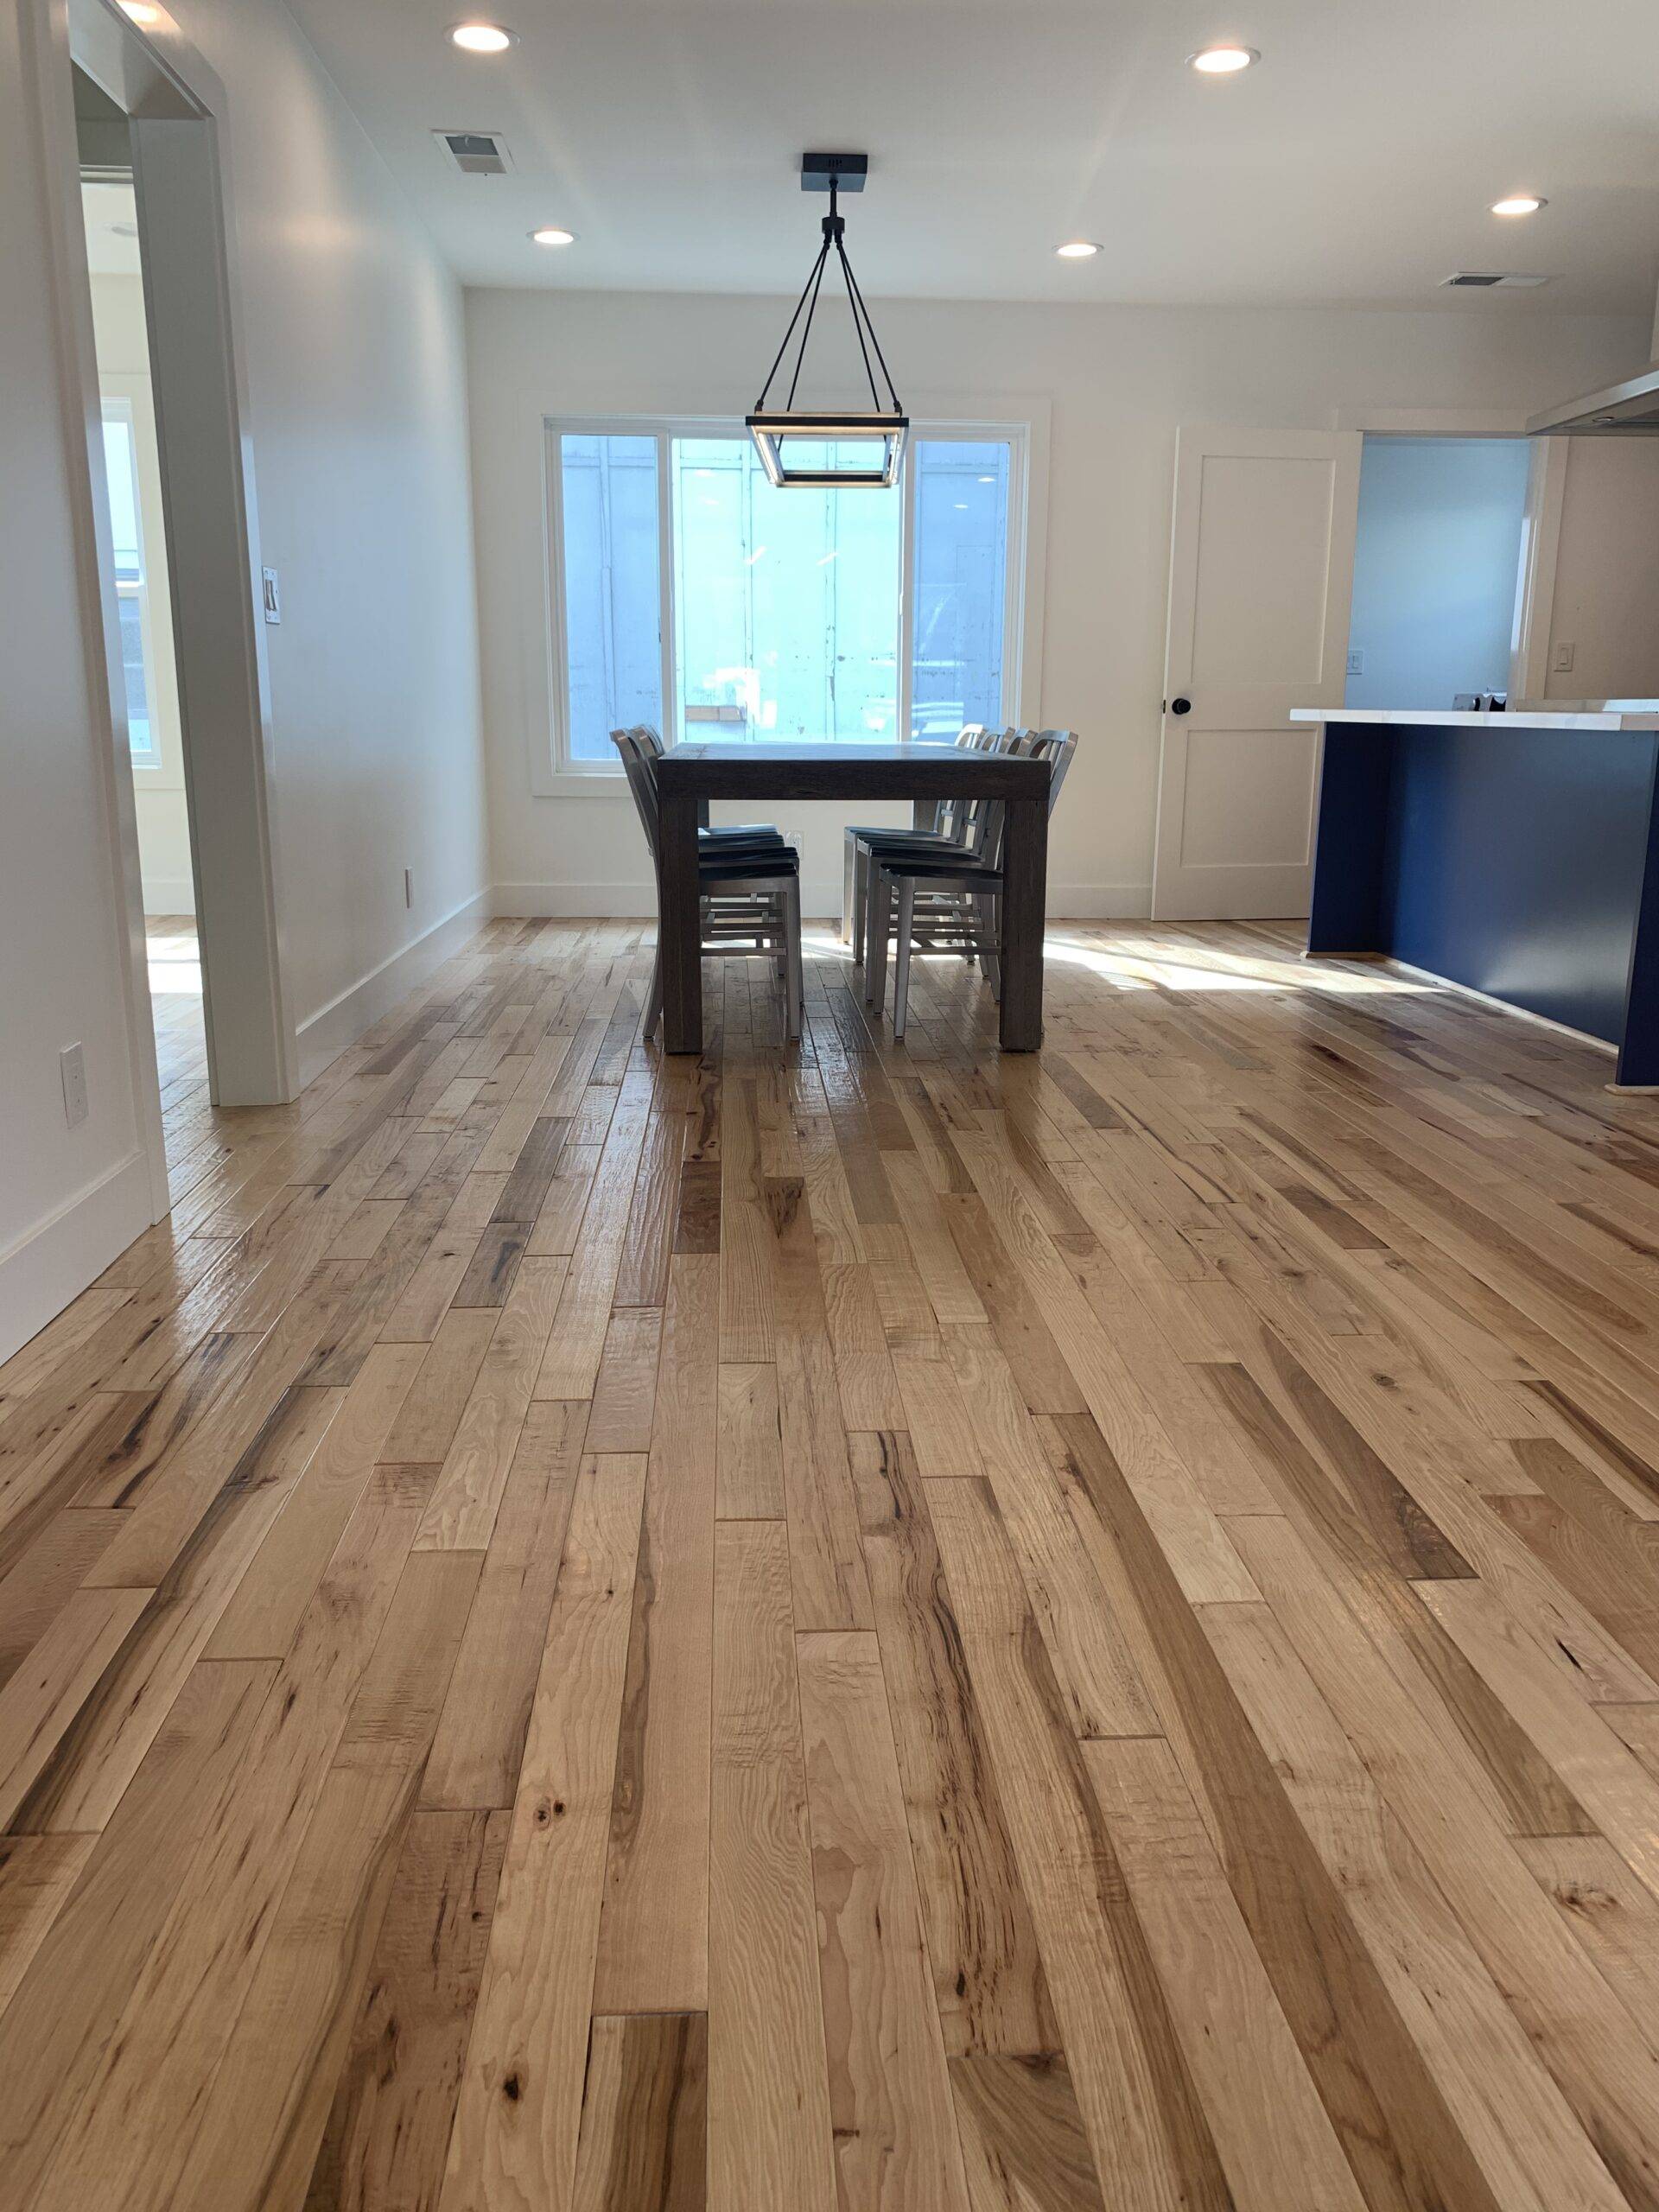 Prefinished engineered Mirage natural white oak floor in San Jose, CA home